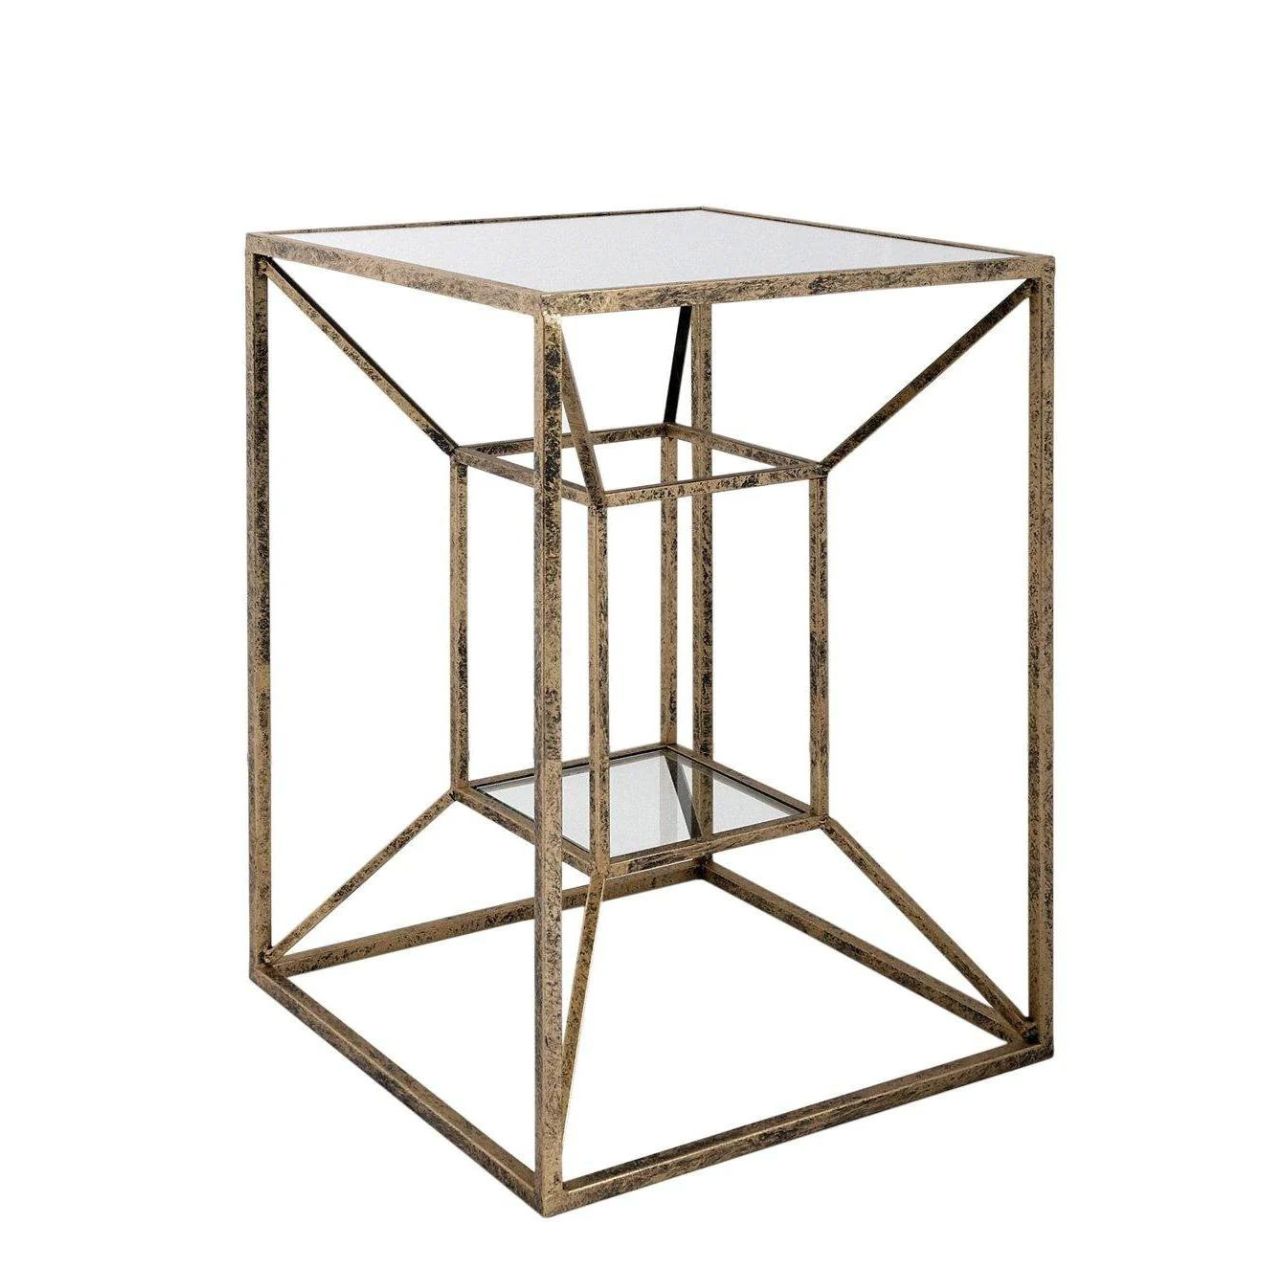 Mindy Brownes Interiors Solomon Side Table  Solomon Side Table  Gold and black framed side table with mirrored top and glass bottom shelf.